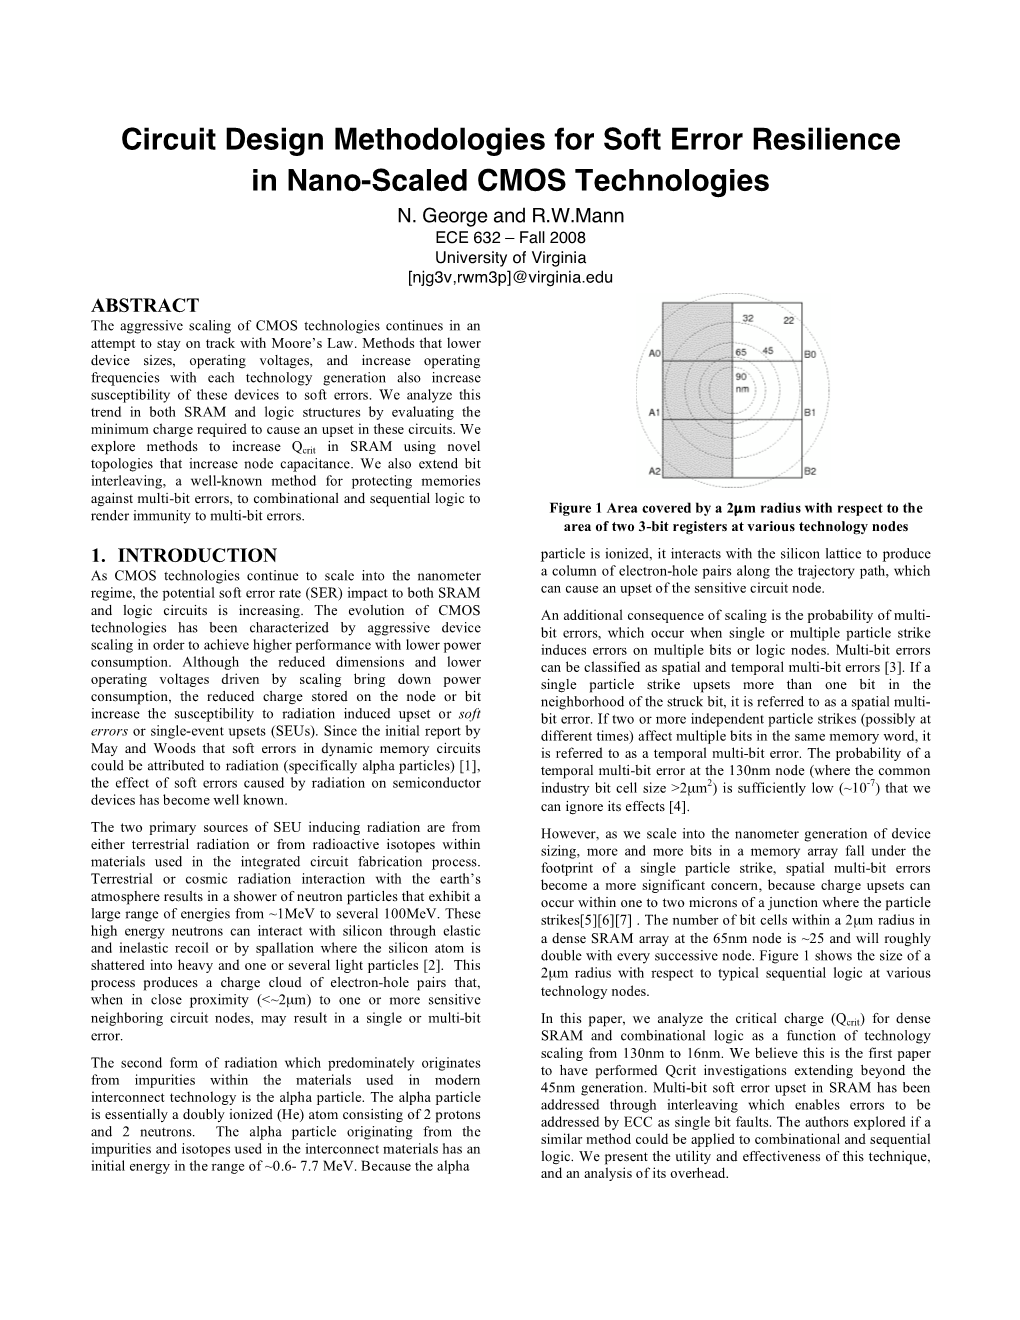 Circuit Design Methodologies for Soft Error Resilience in Nano-Scaled CMOS Technologies N